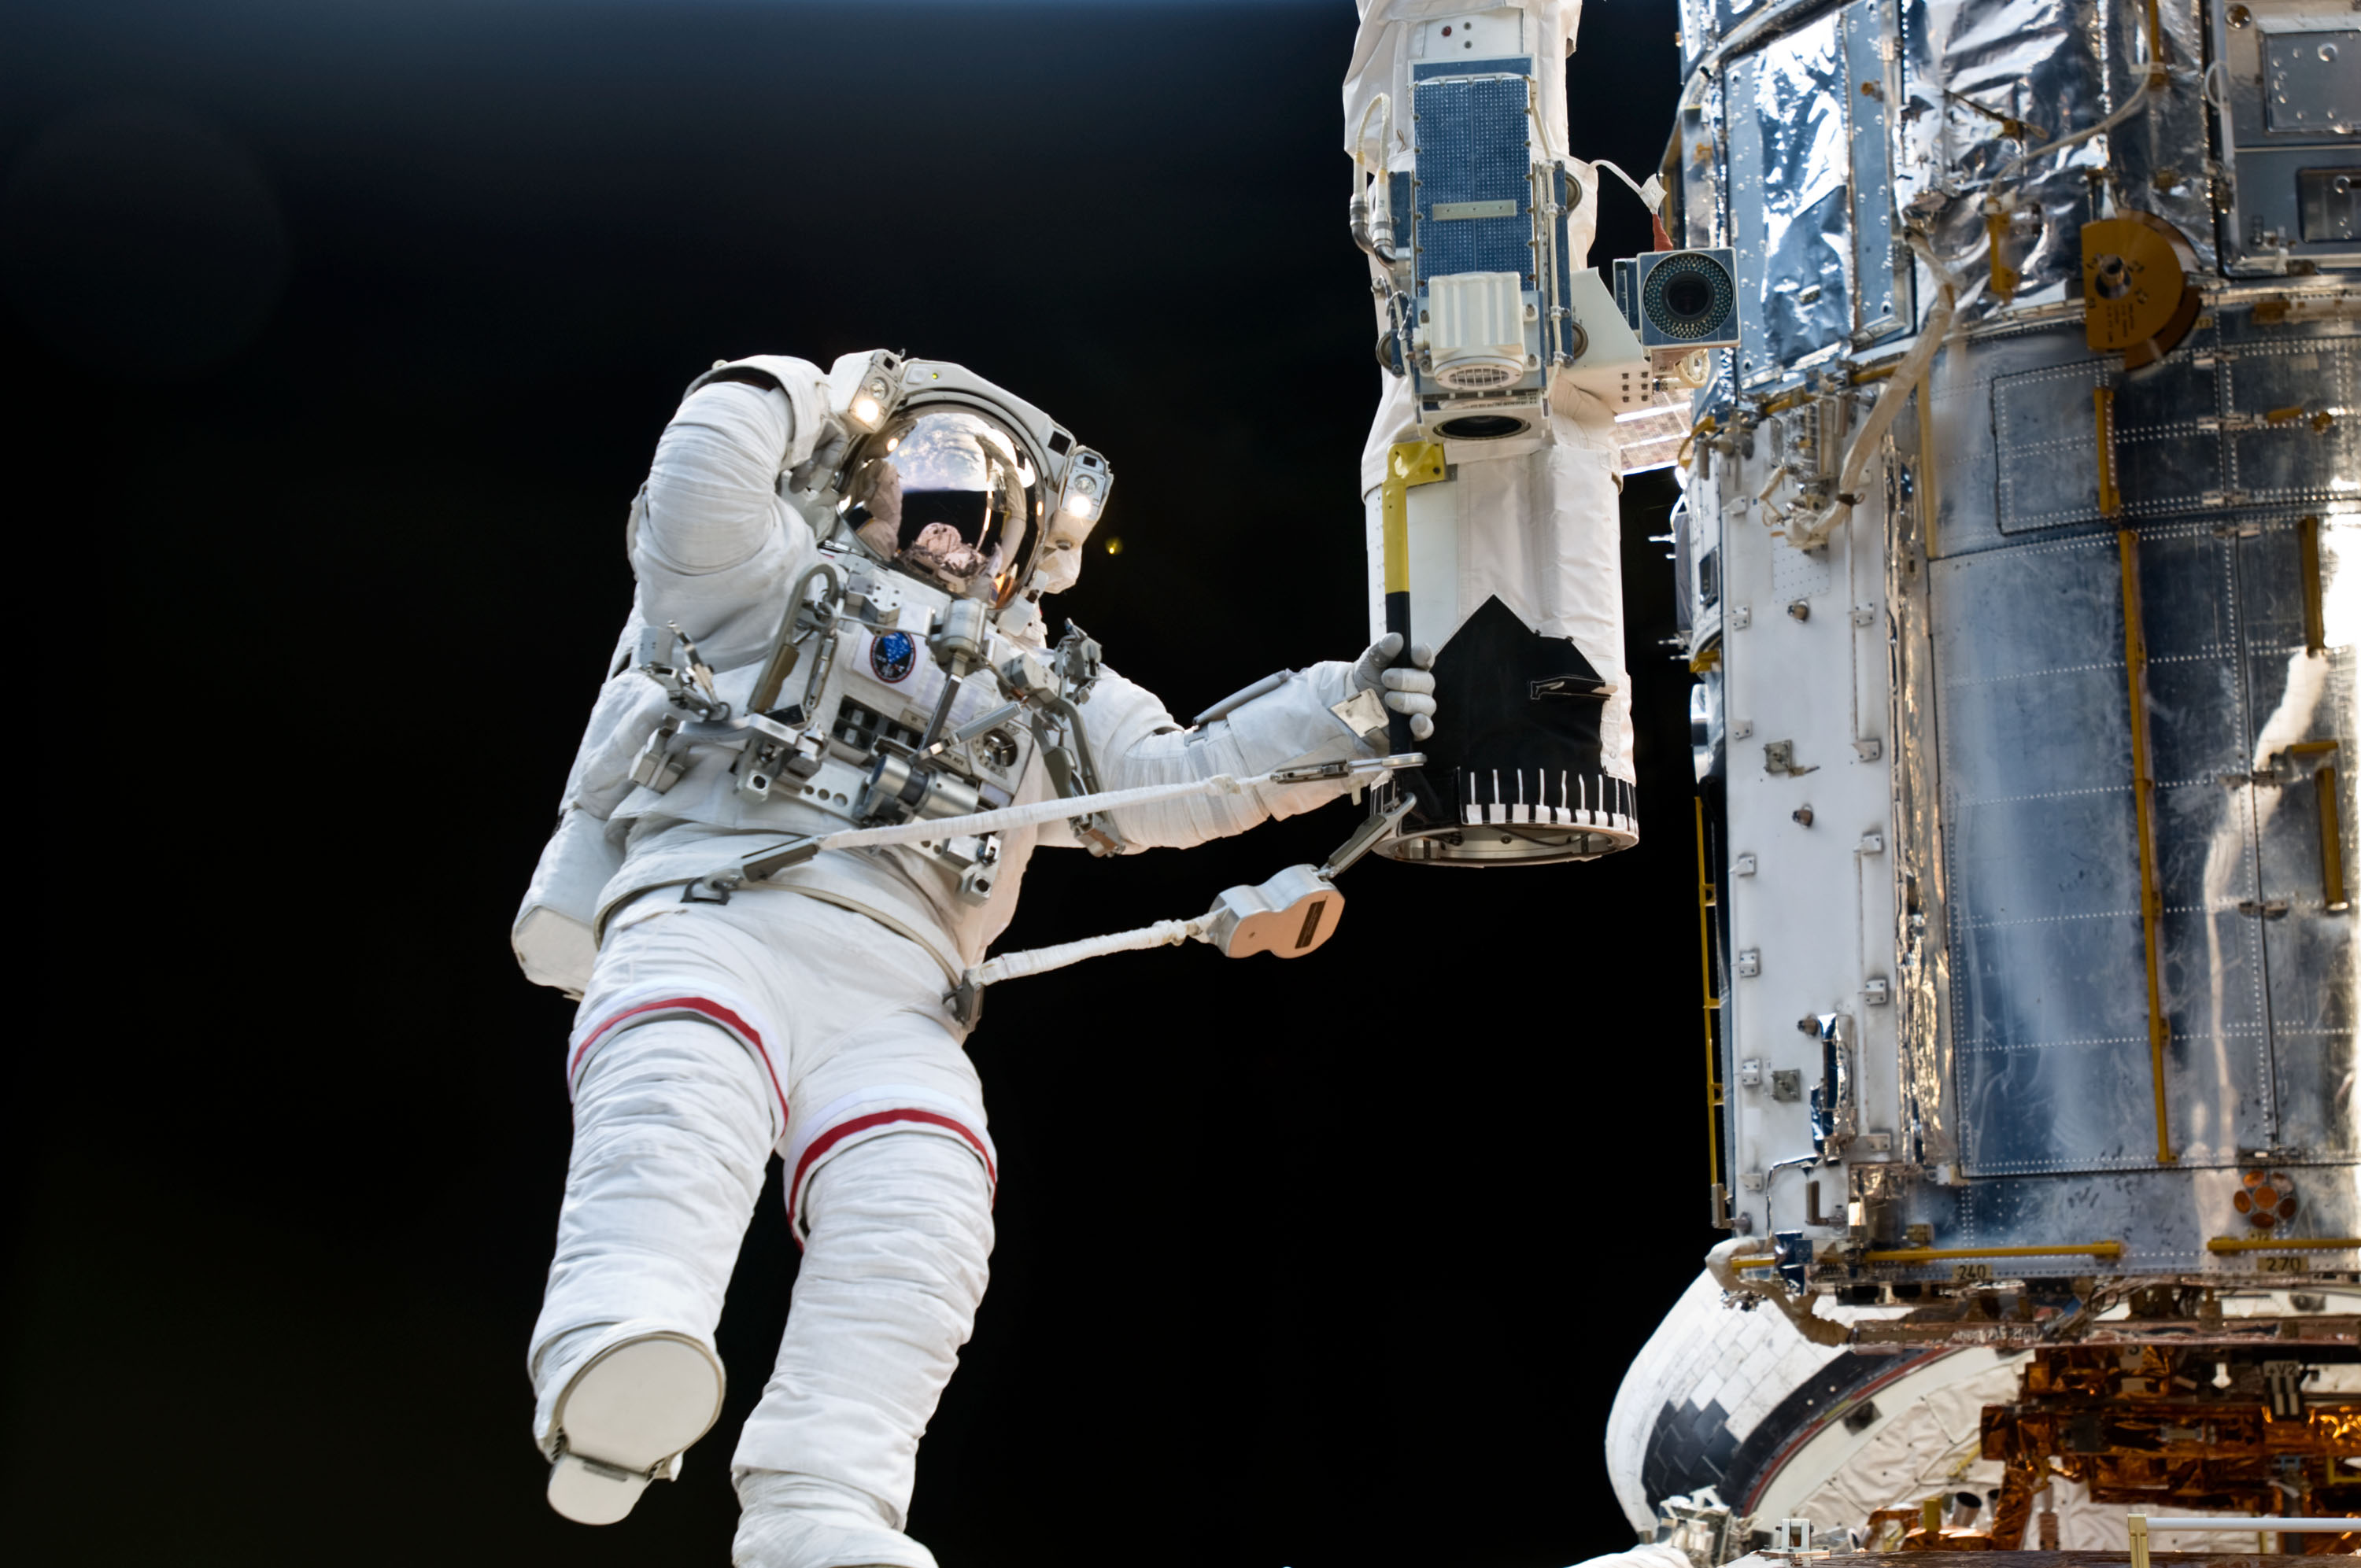 An astronaut tethered to the end of the Shuttle's robotic arm to the left of Hubble.